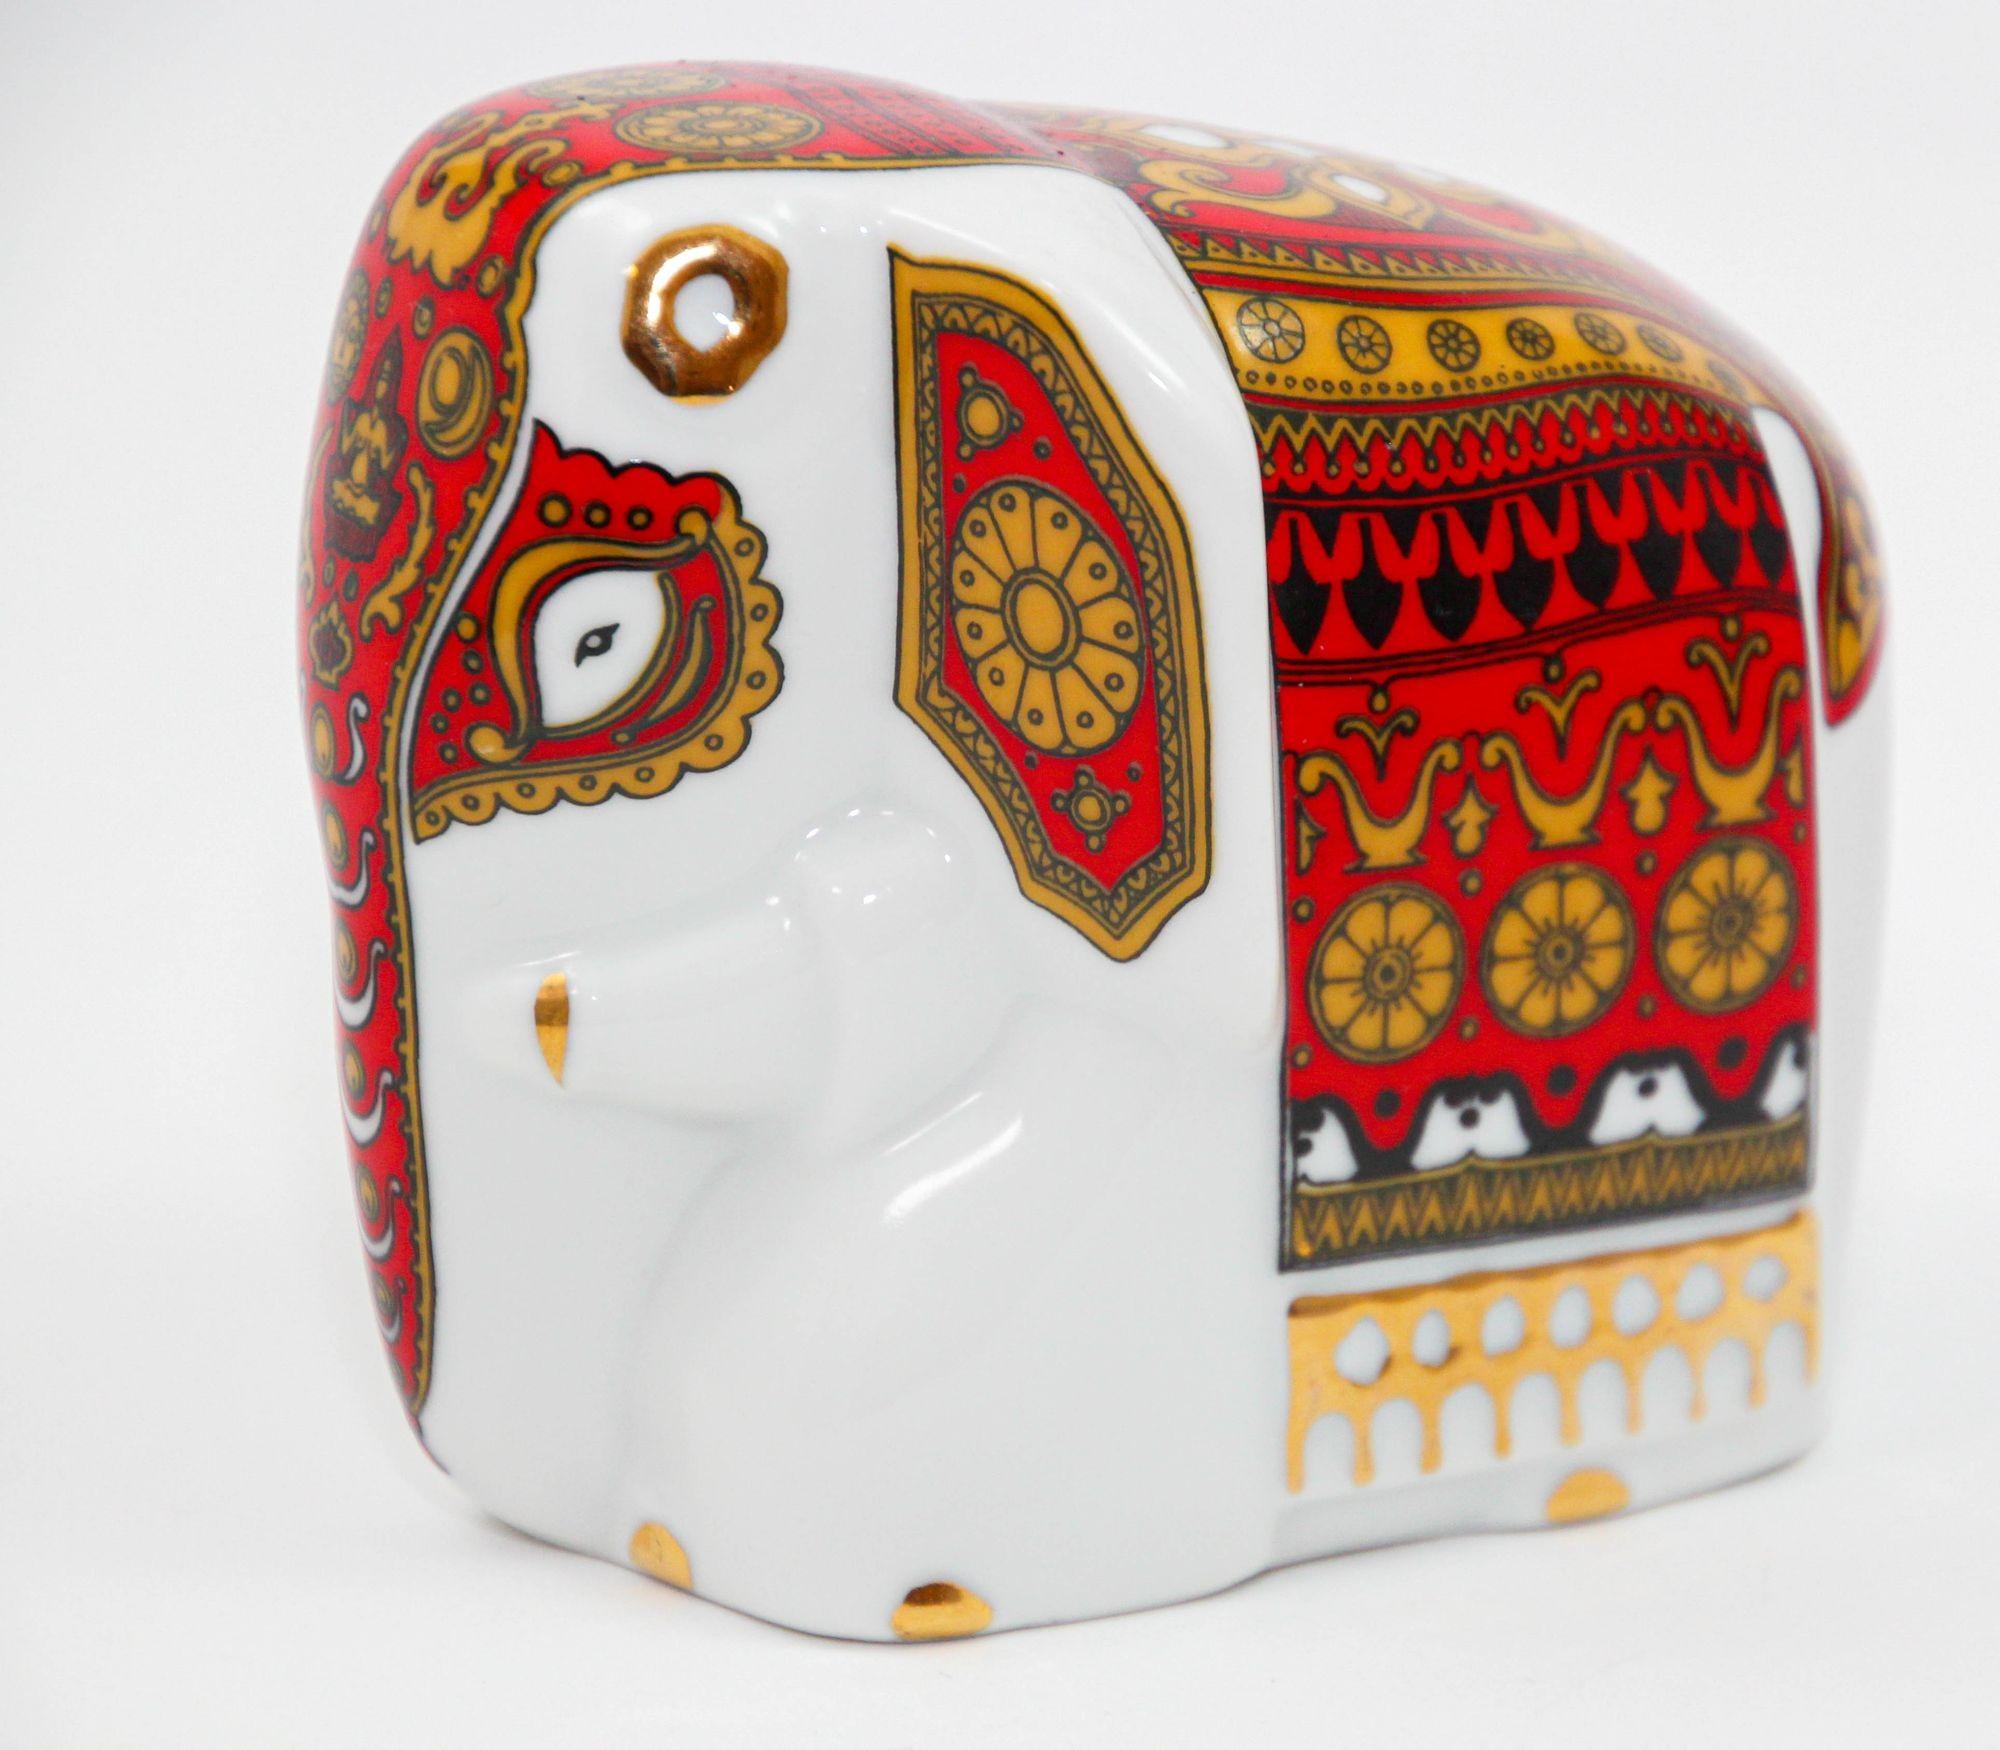 Asian Gilded Porcelain Elephant Ornament Paperweight from Sri Lanka.
Charming Mlesna porcelain with gold and red on white.
This porcelain elephant with exquisite gold gilding was manufactured by Lanka Porcelain pvt LTD in Sri Lanka.
It was